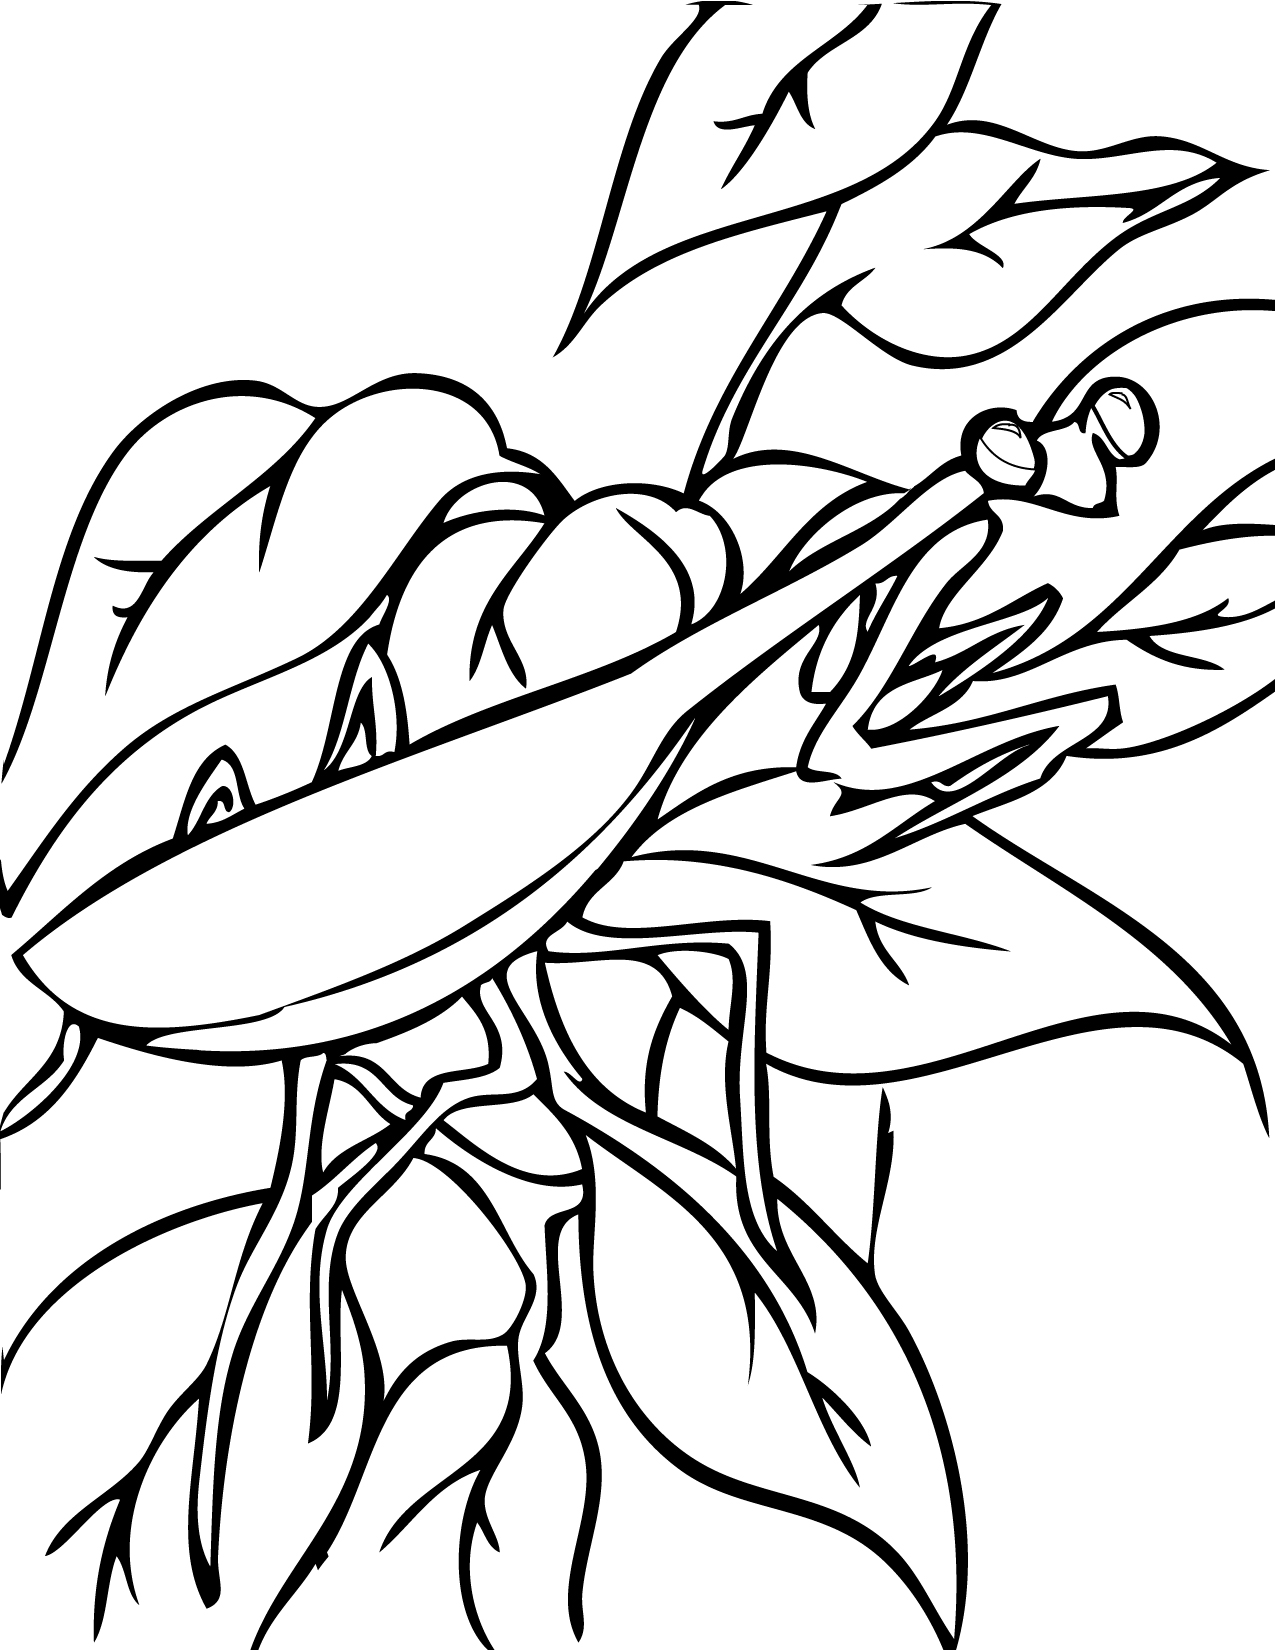 praying mantis ink insects coloring pages | Printable Coloring